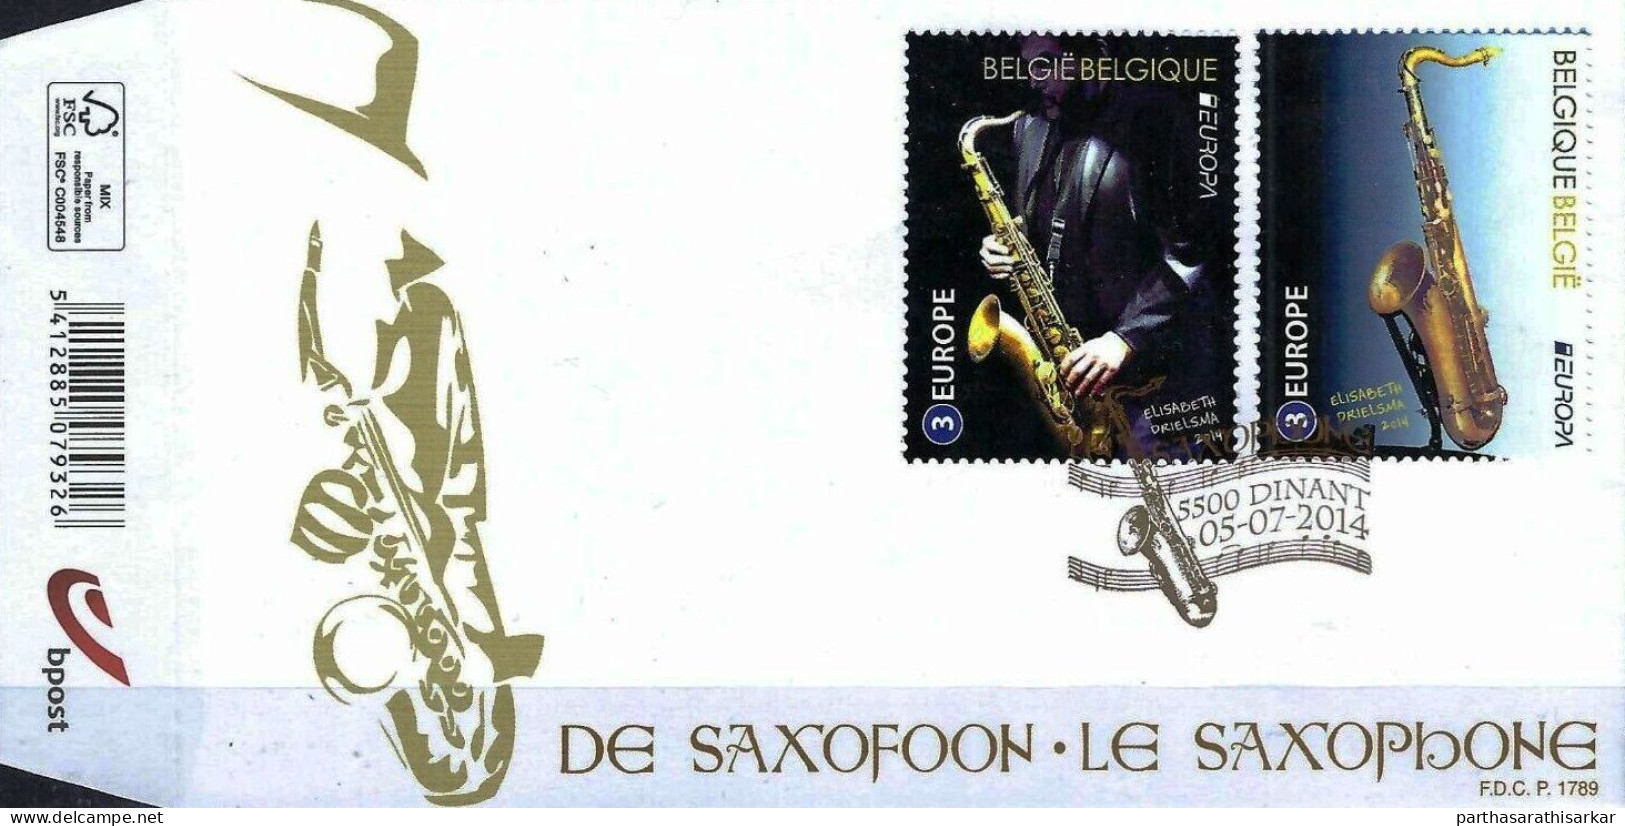 BELGIUM 2014 EUROPA CEPT MUSICAL INSTRUMENTS UNUSUAL STAMPS FDC RARE (HIGH FACE 15.8 EURO) - Covers & Documents